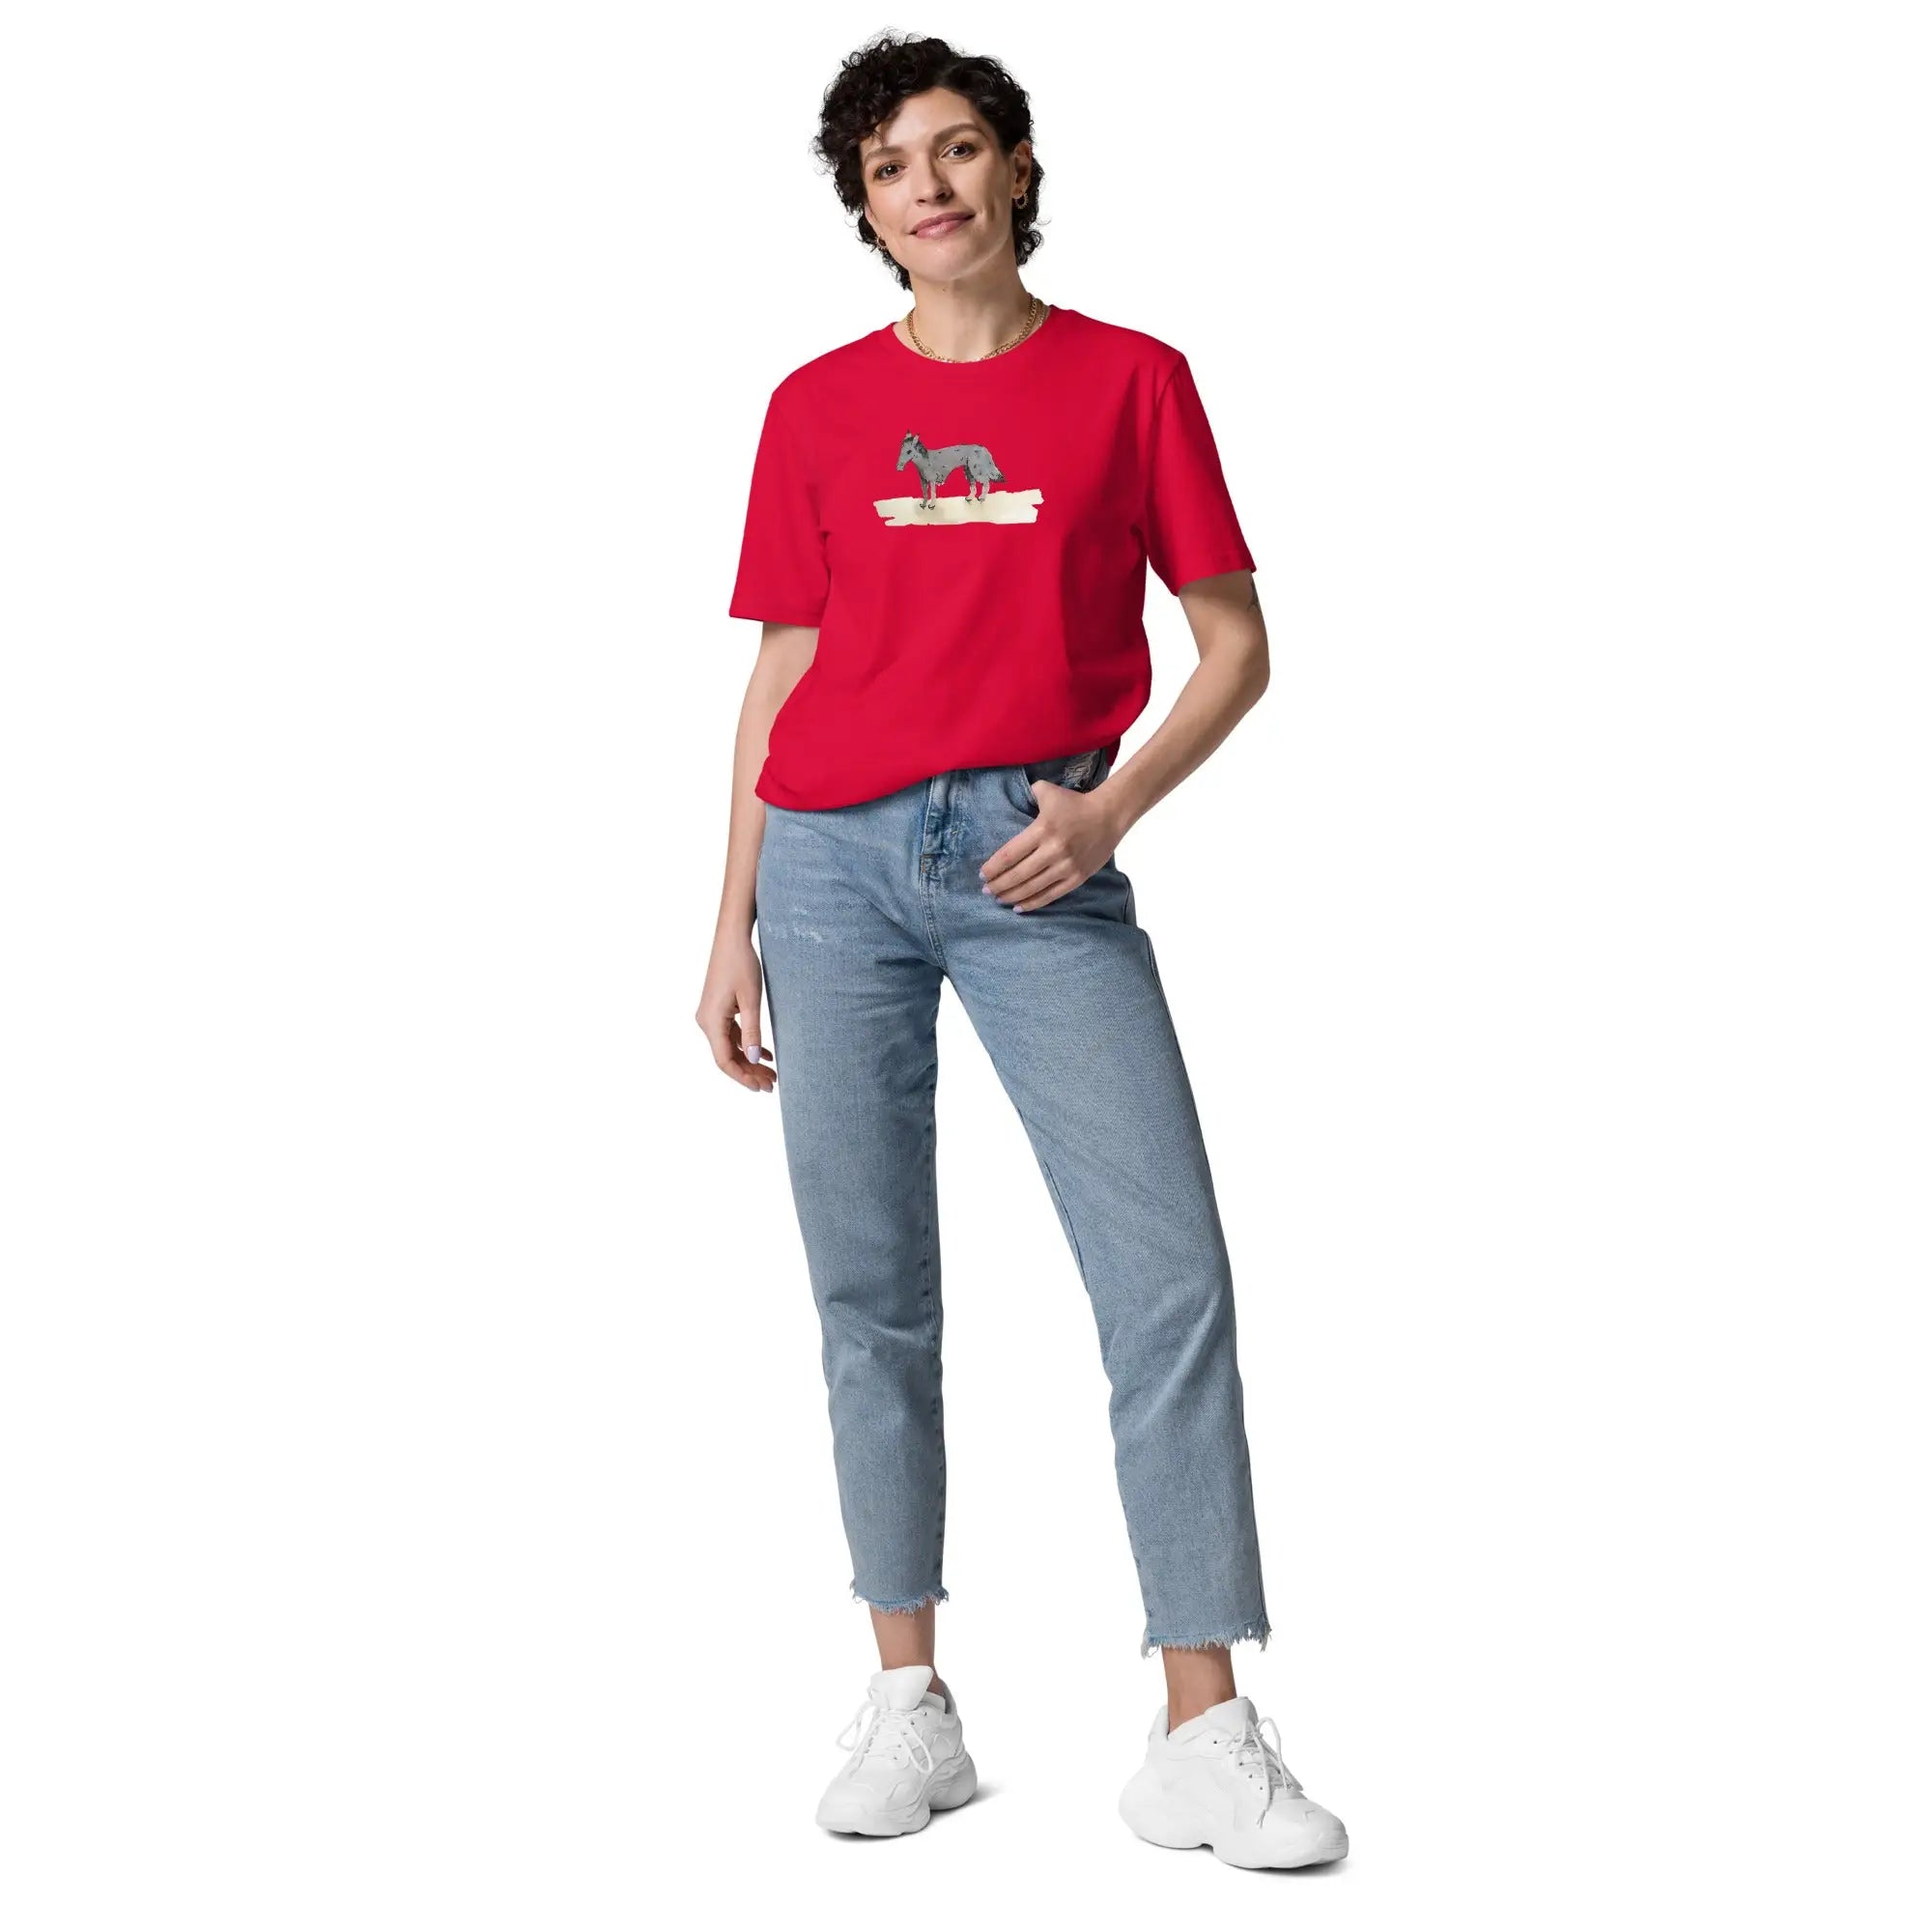 Organic Cotton T-Shirt in Red on Woman